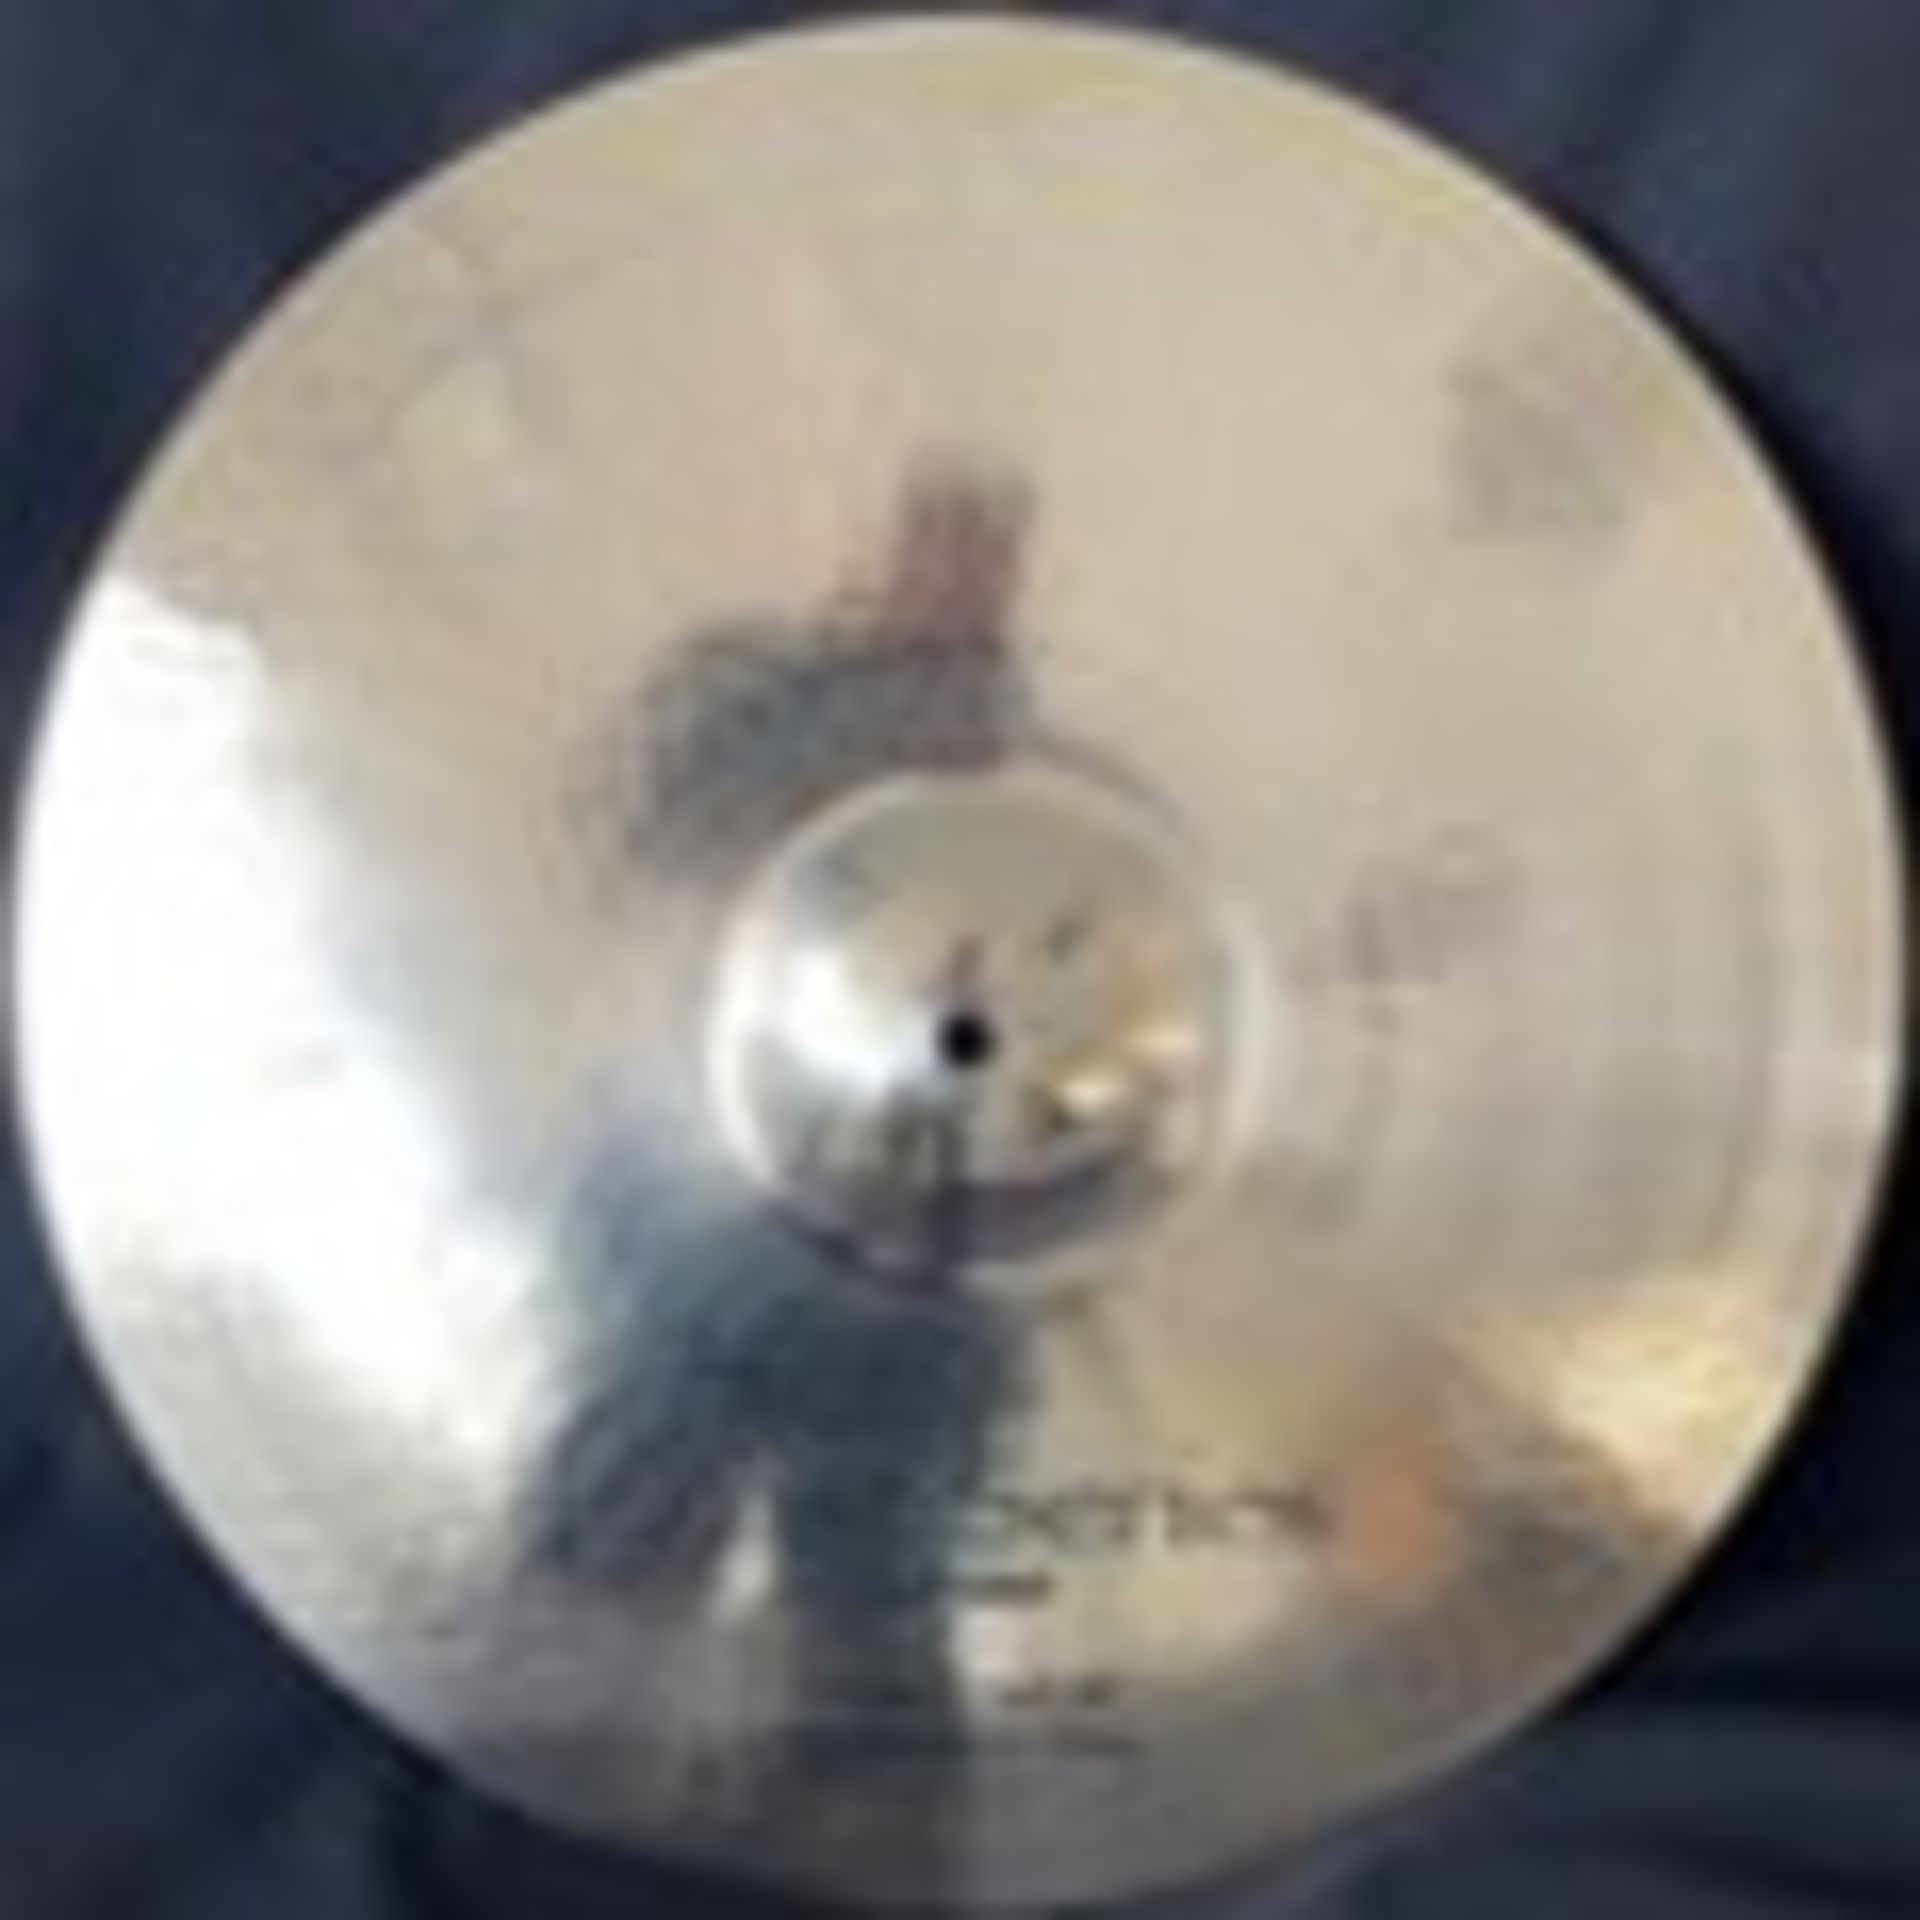 Sonor Cast Series Cymbals - great sound -16,18" crash plus 20" Ride - Image 3 of 3